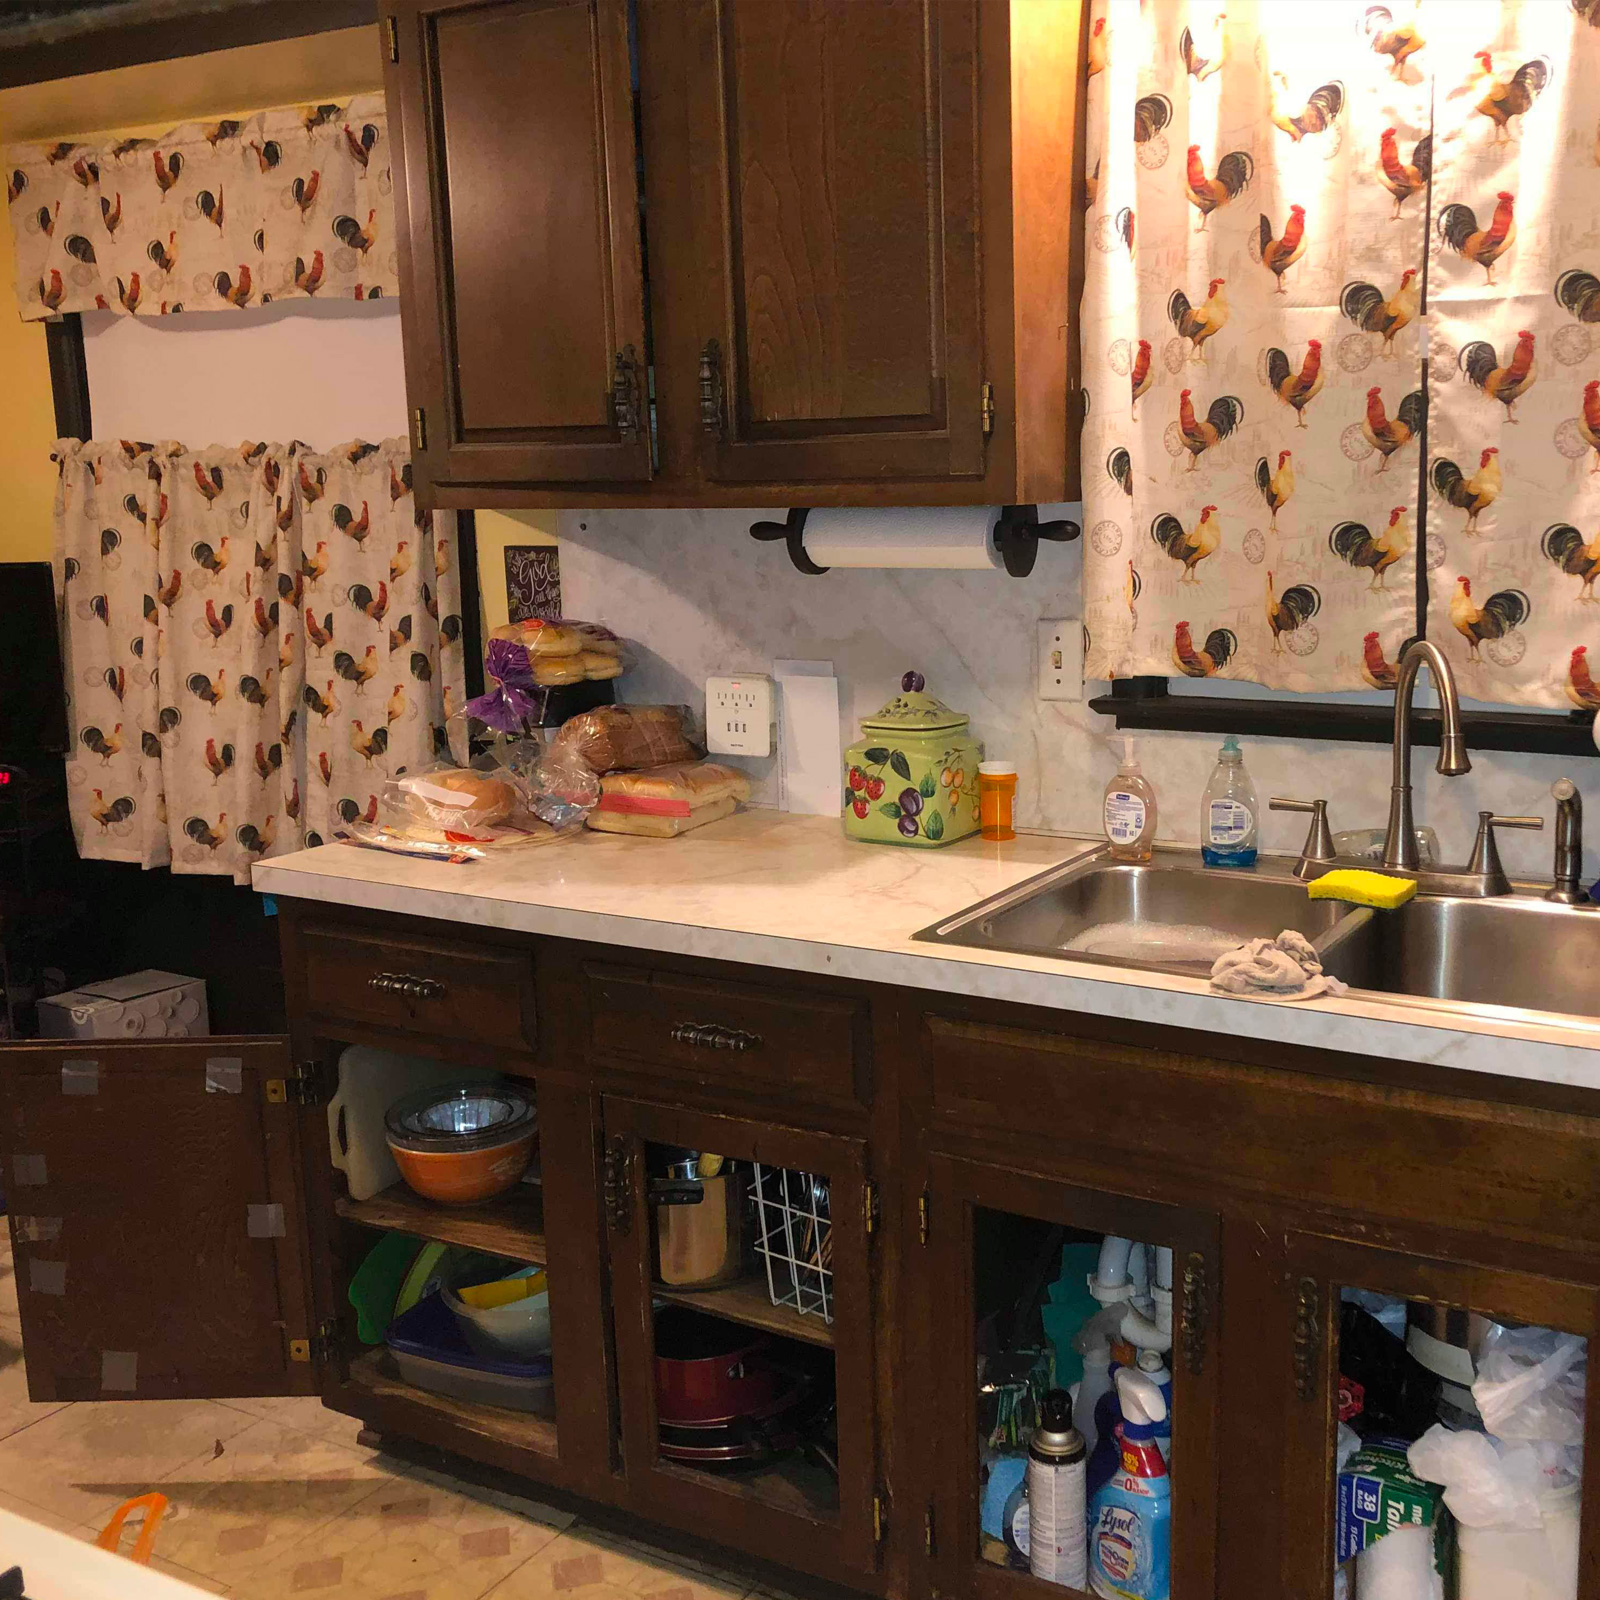 Entry 177 - These cabinets are mismatched, broken, taped & missing